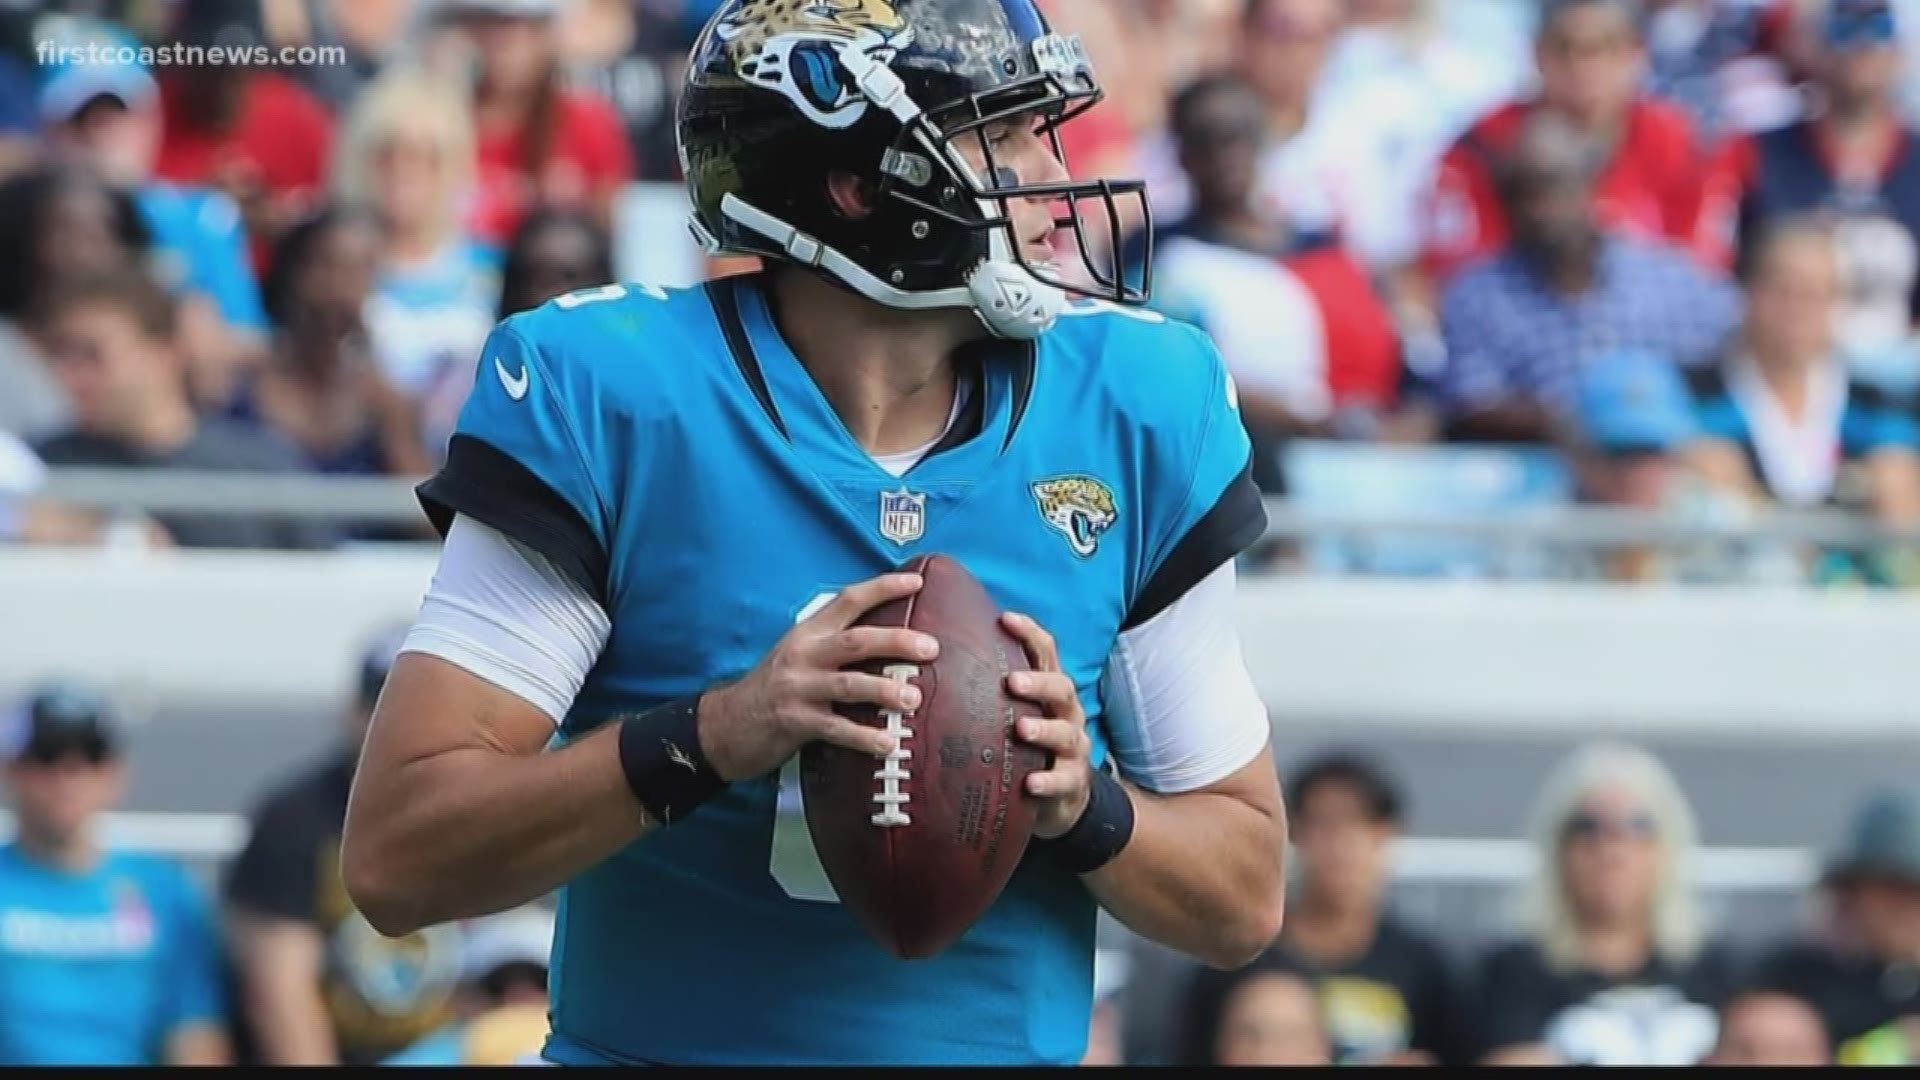 Jaguars head coach Doug Marrone announced Monday that quarterback Blake Bortles has been benched and Cody Kessler has been named as the team's starter.